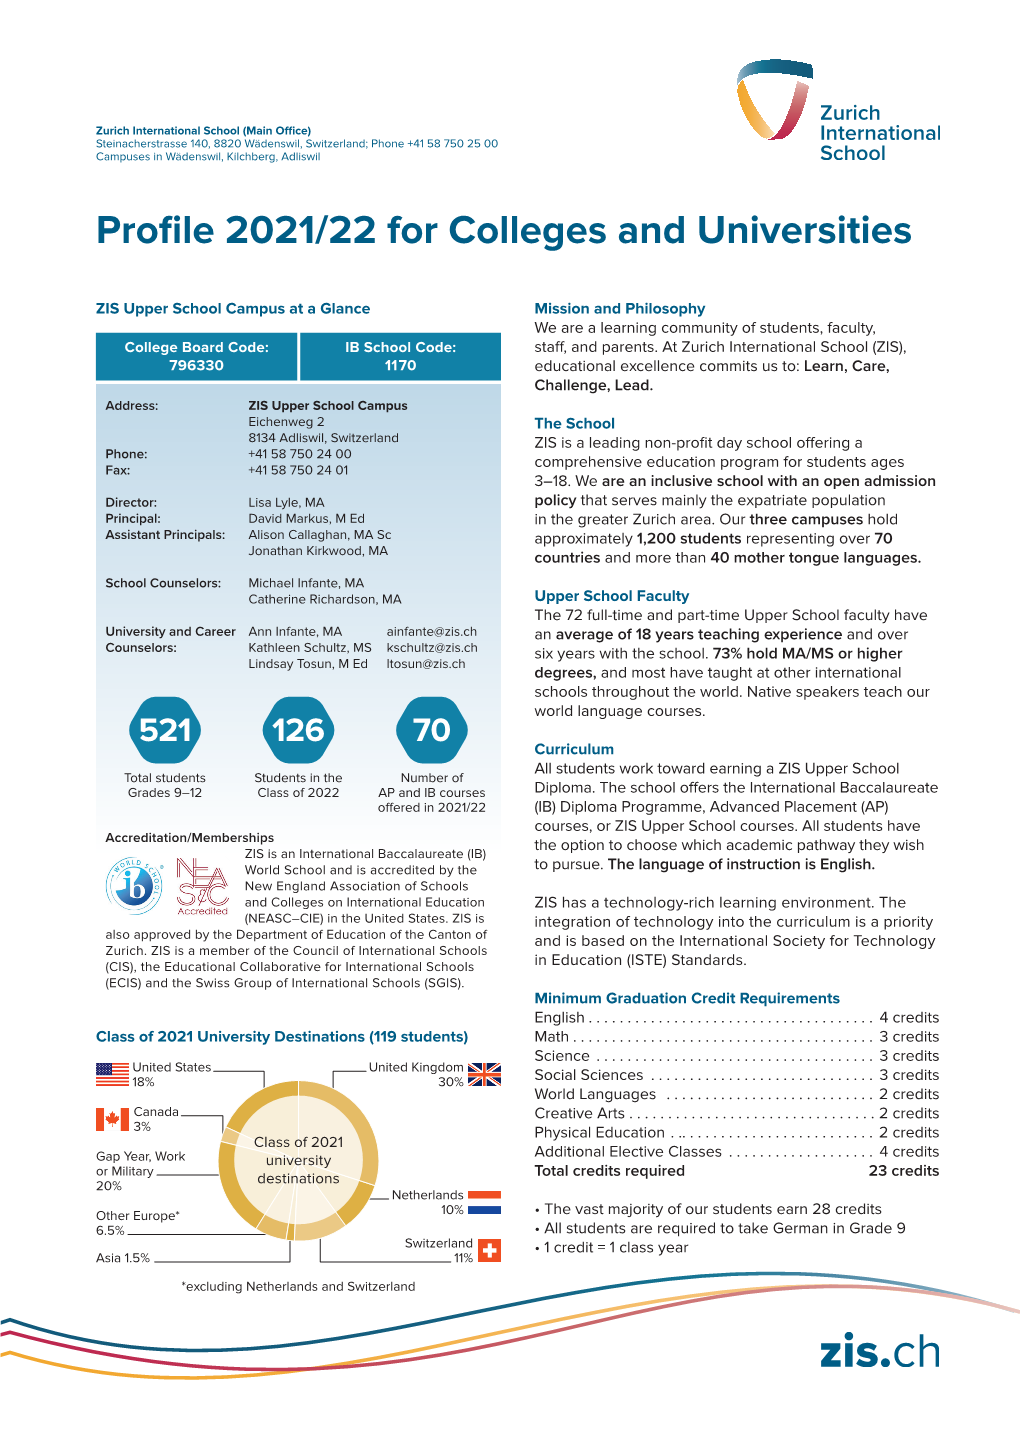 Profile 2020/21 for Colleges and Universities